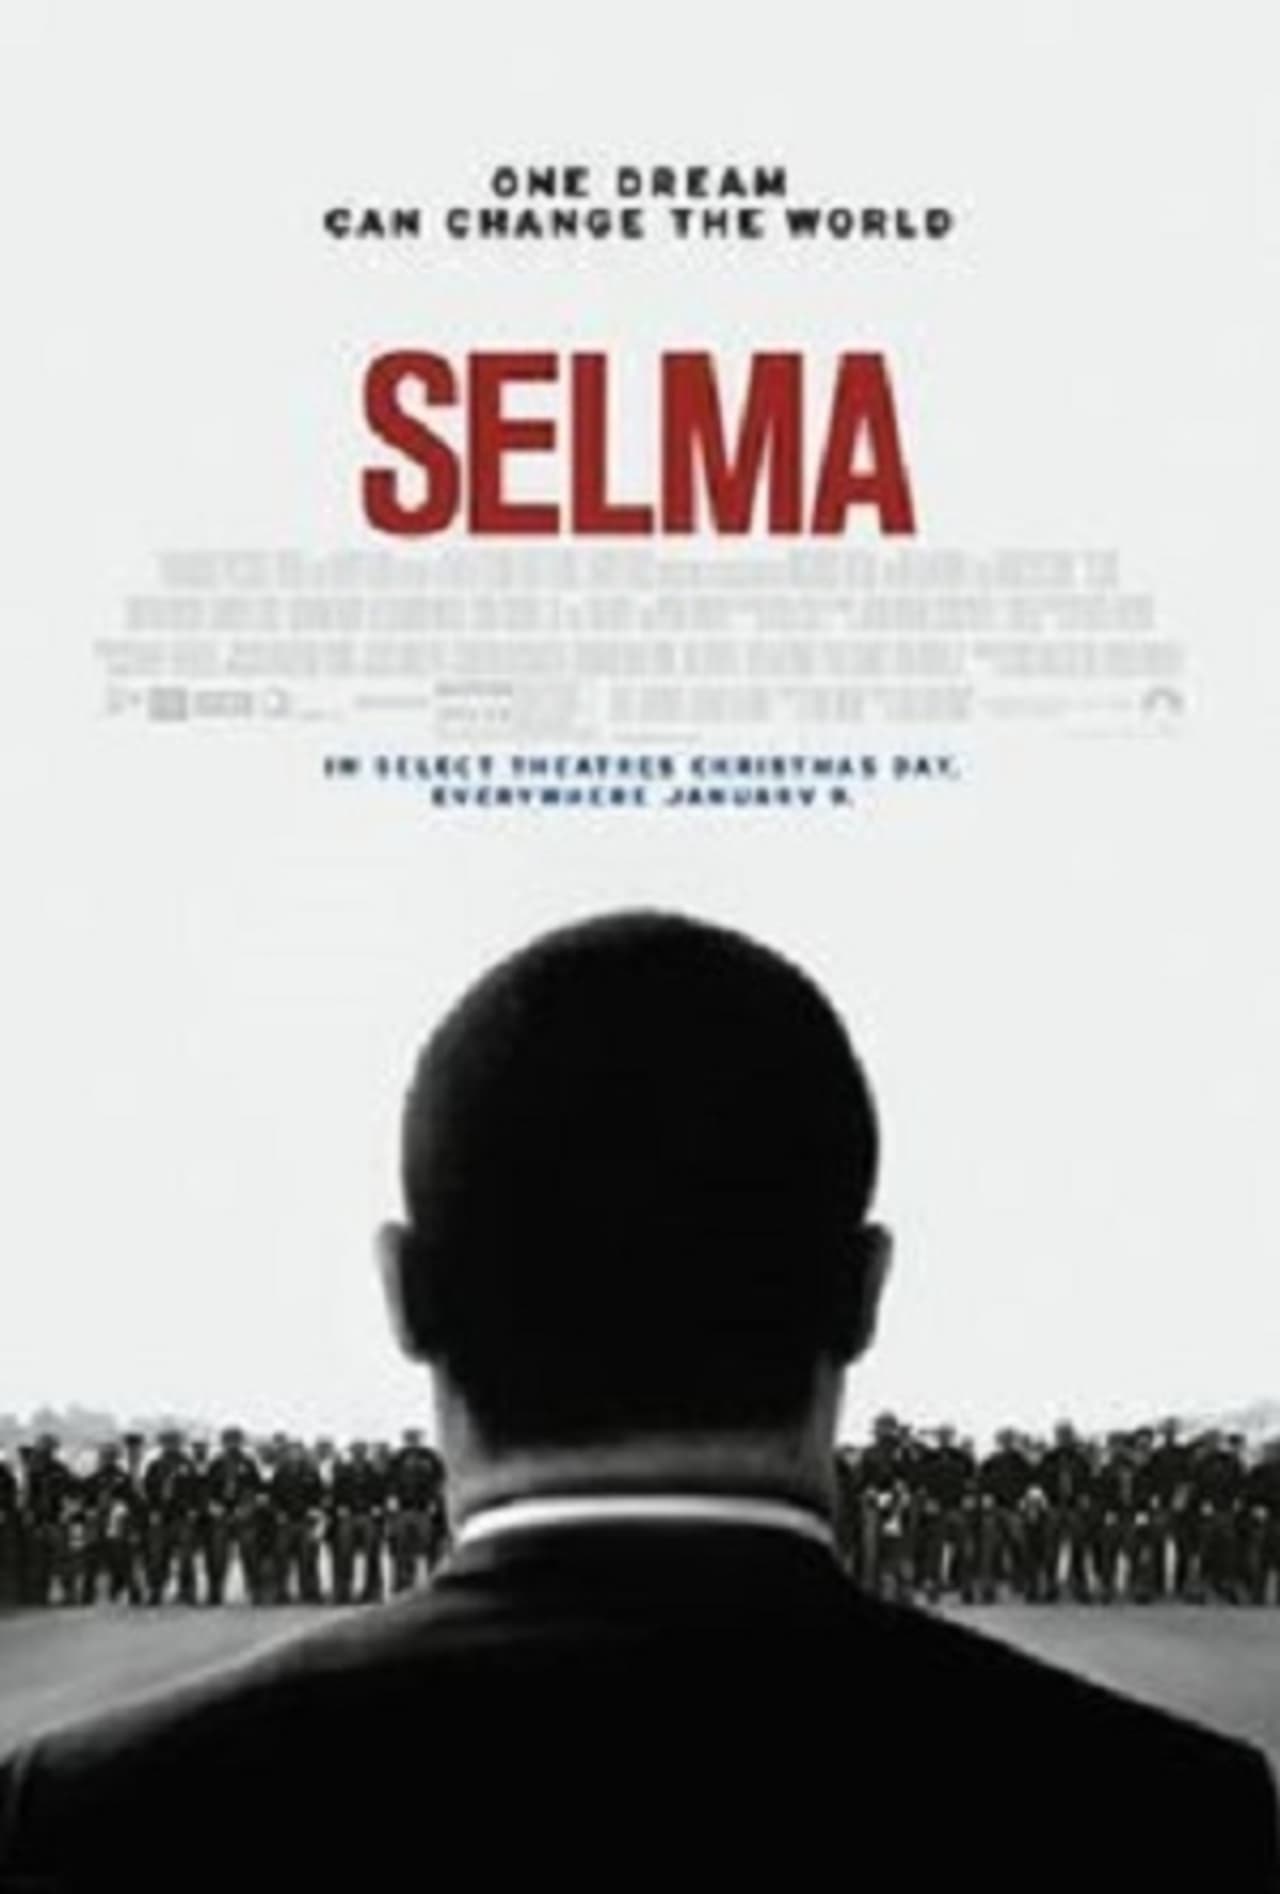 "Selma" will be shown as part of Black History Month events at the Harrison Public Library.